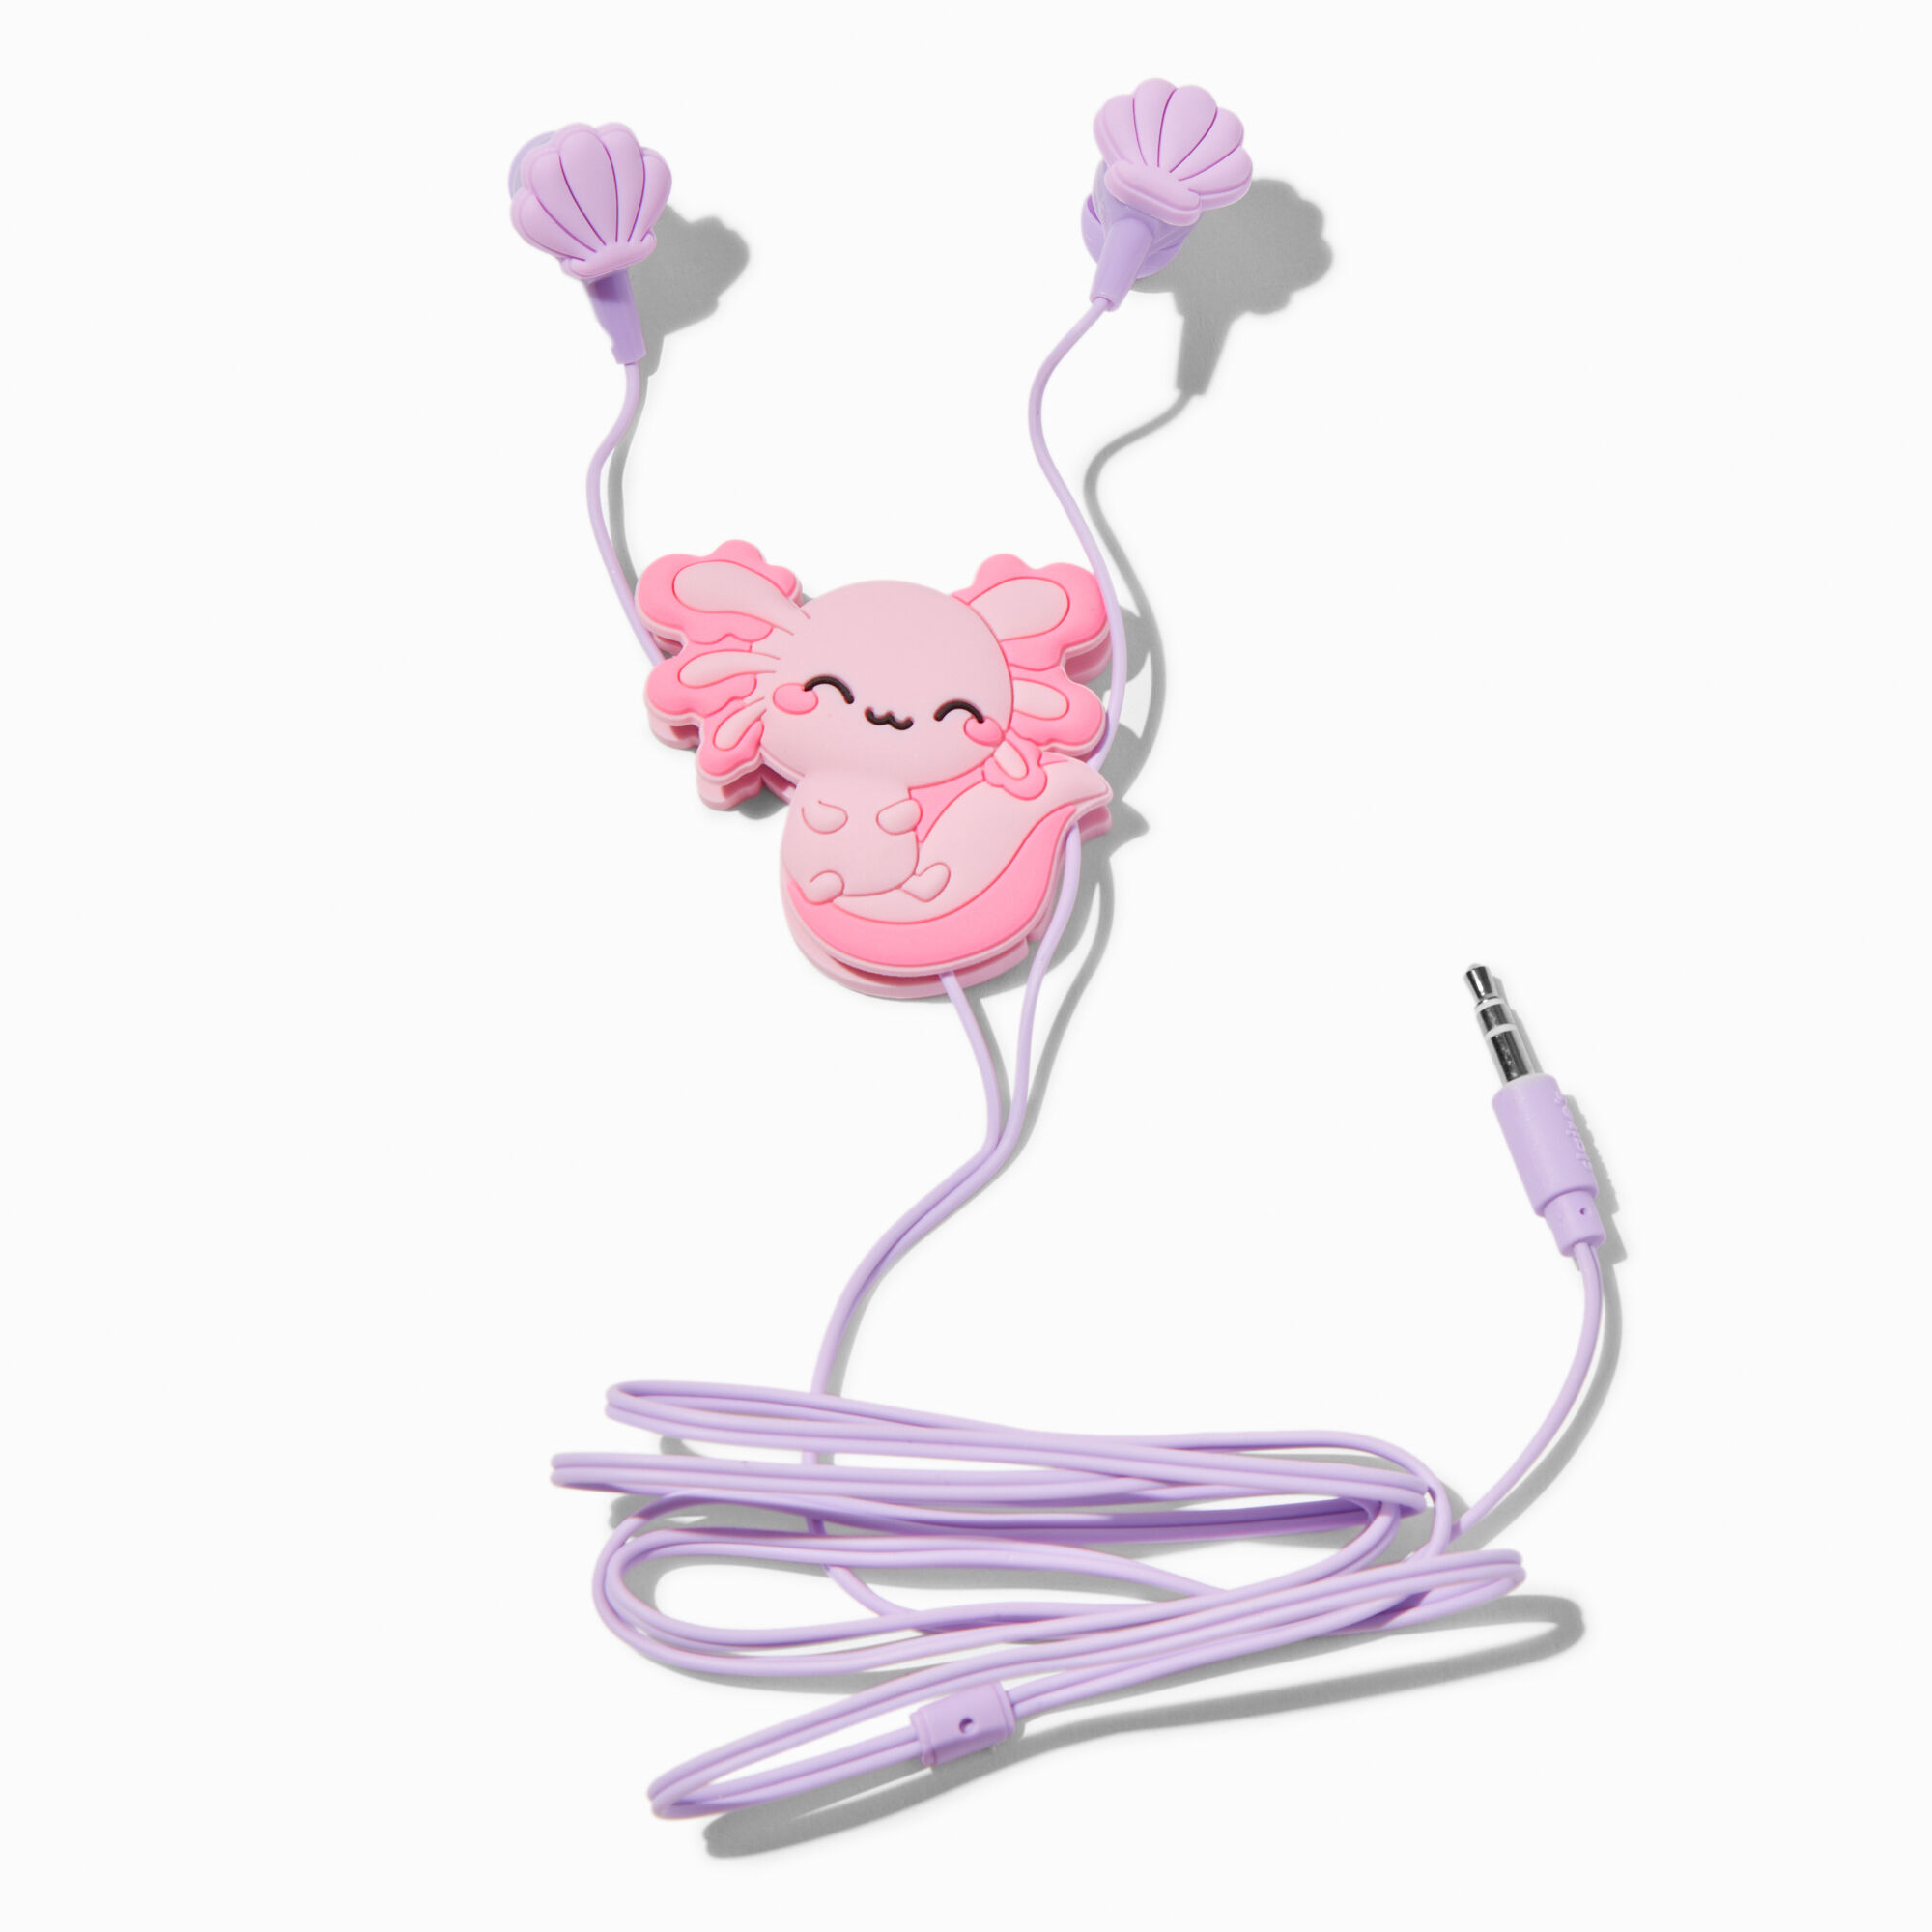 View Claires Axolotl Silicone Earbuds Winder information